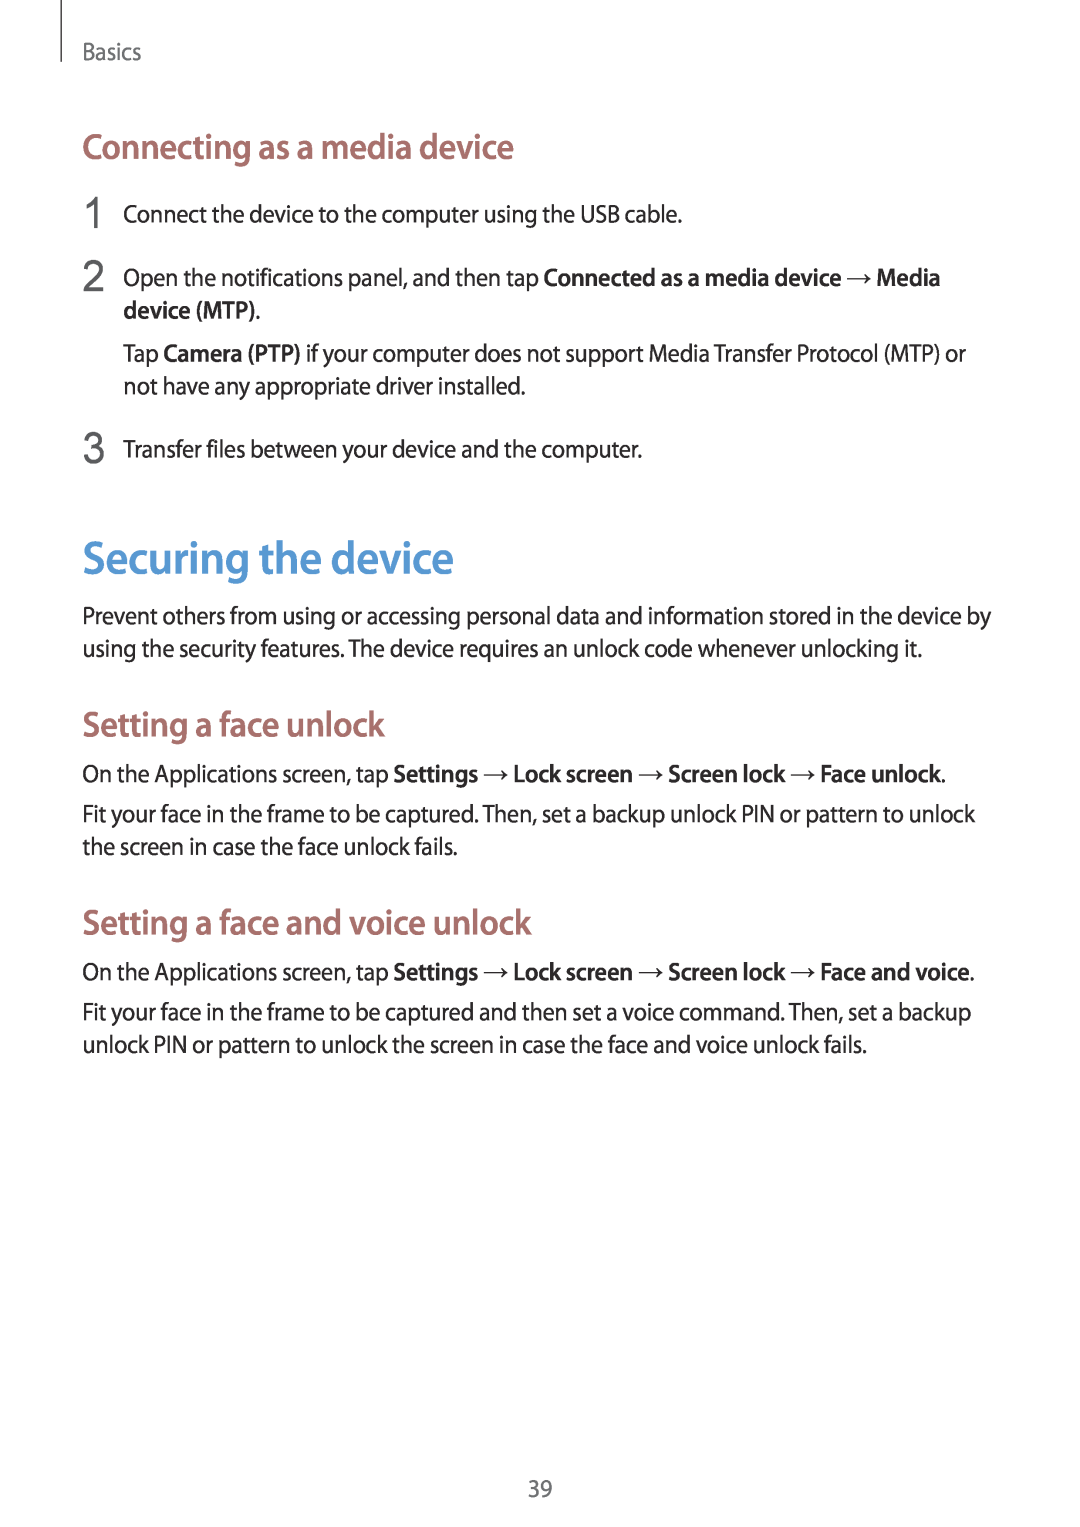 Samsung GT-I8730TAADTM manual Securing the device, Connecting as a media device, Setting a face unlock, device MTP, Basics 